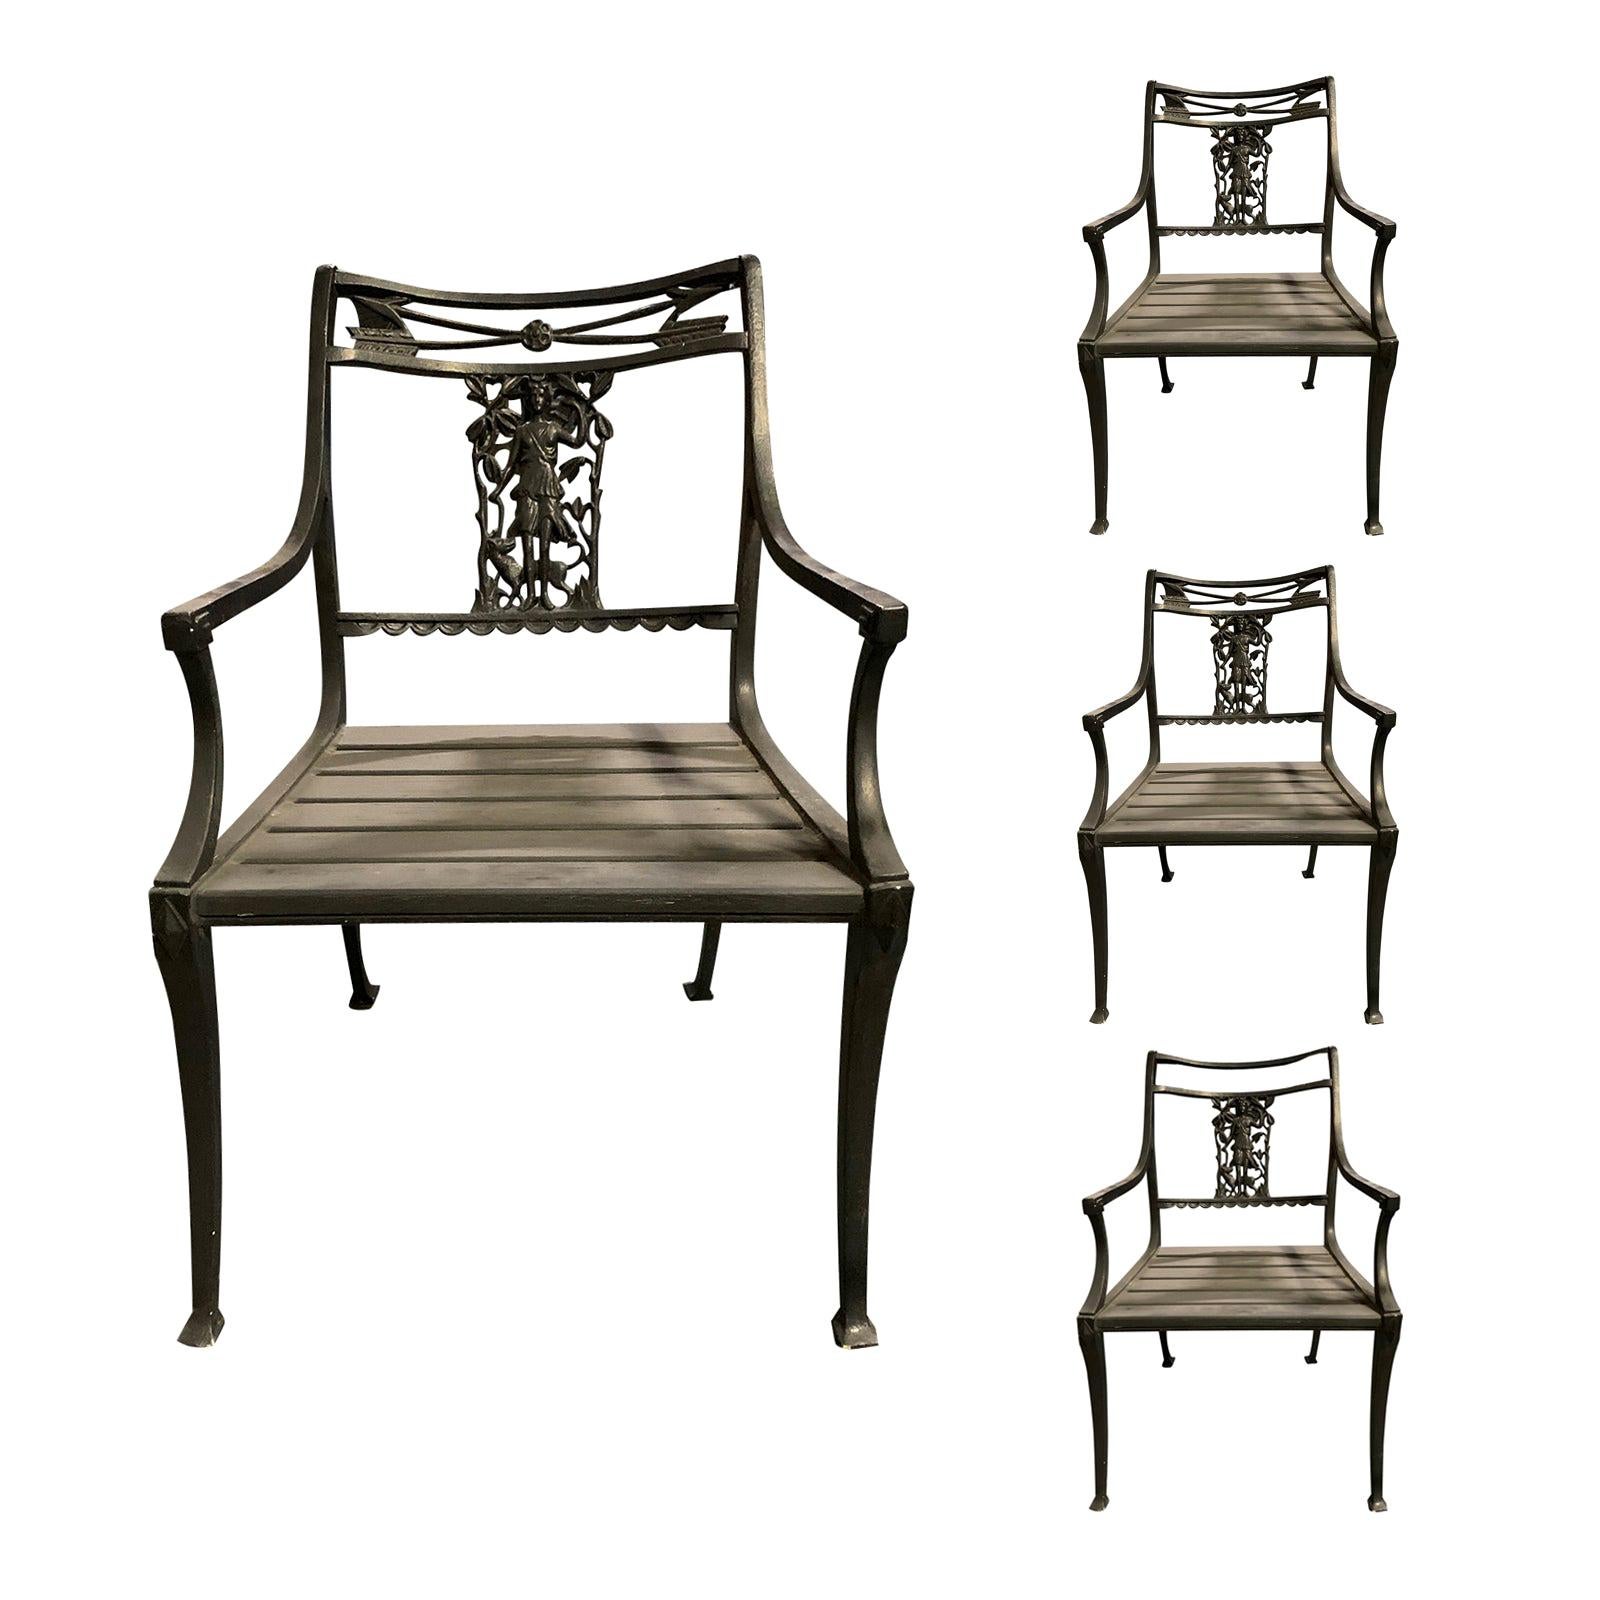 Set of Four by Molla Wrought Iron Neoclassical Diana the Huntress Garden Chairs